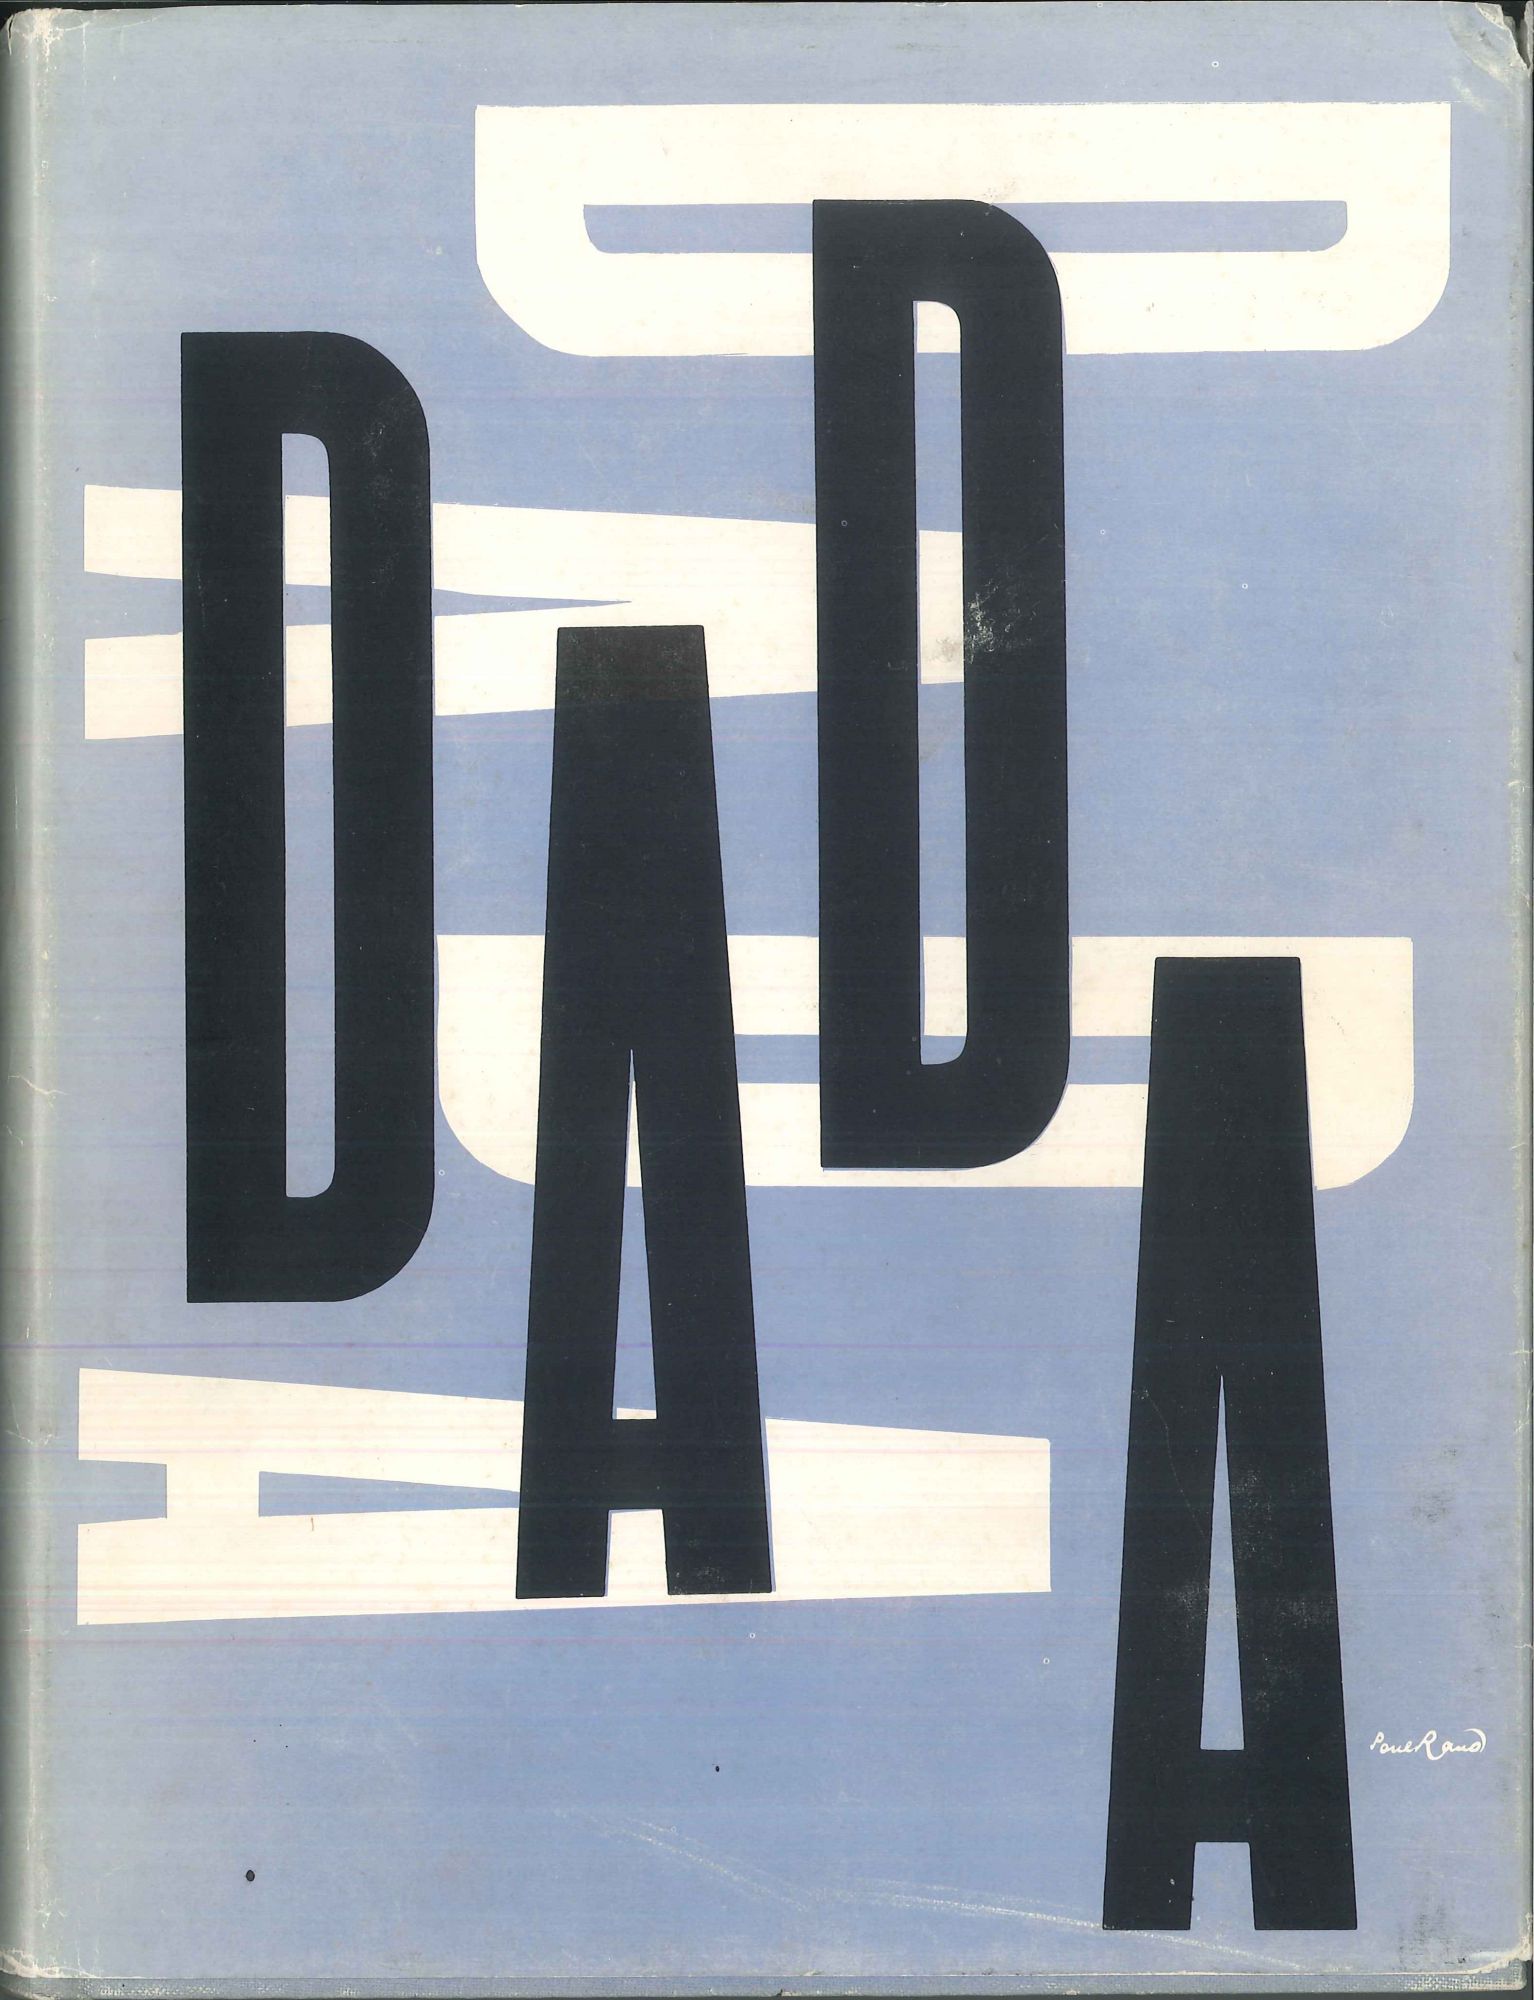 Motherwell’s copy of The Dada Painters and Poets